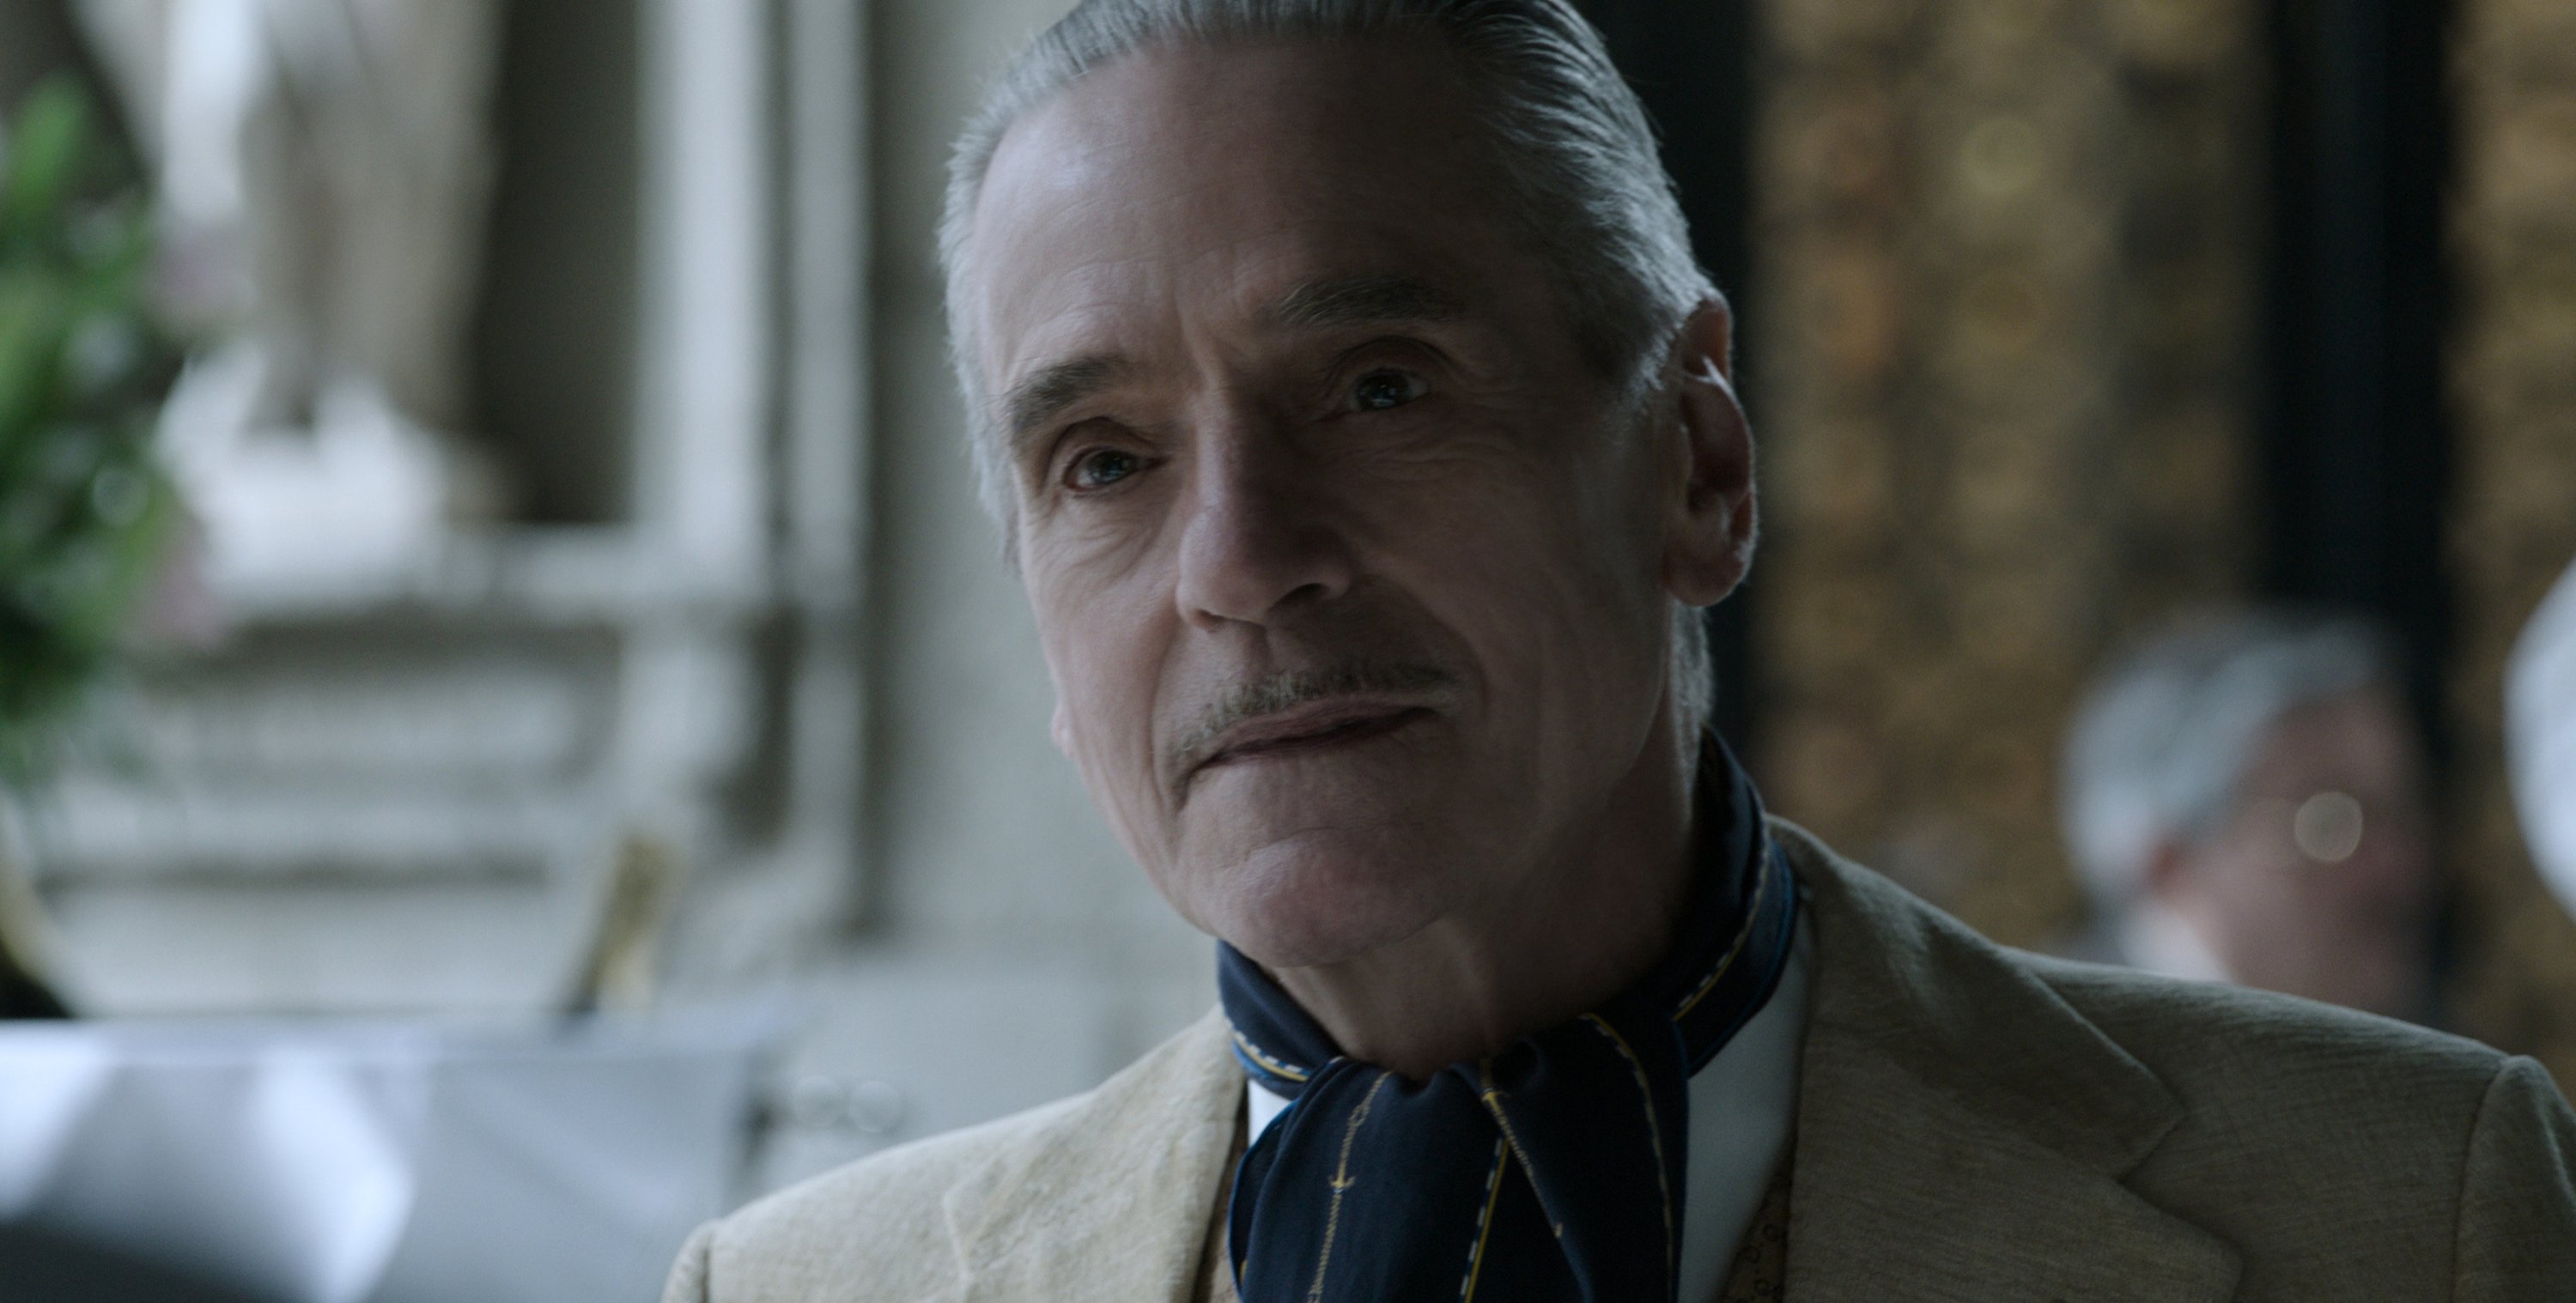 Jeremy Irons as Rodolfo Gucci, in a scene from the film 